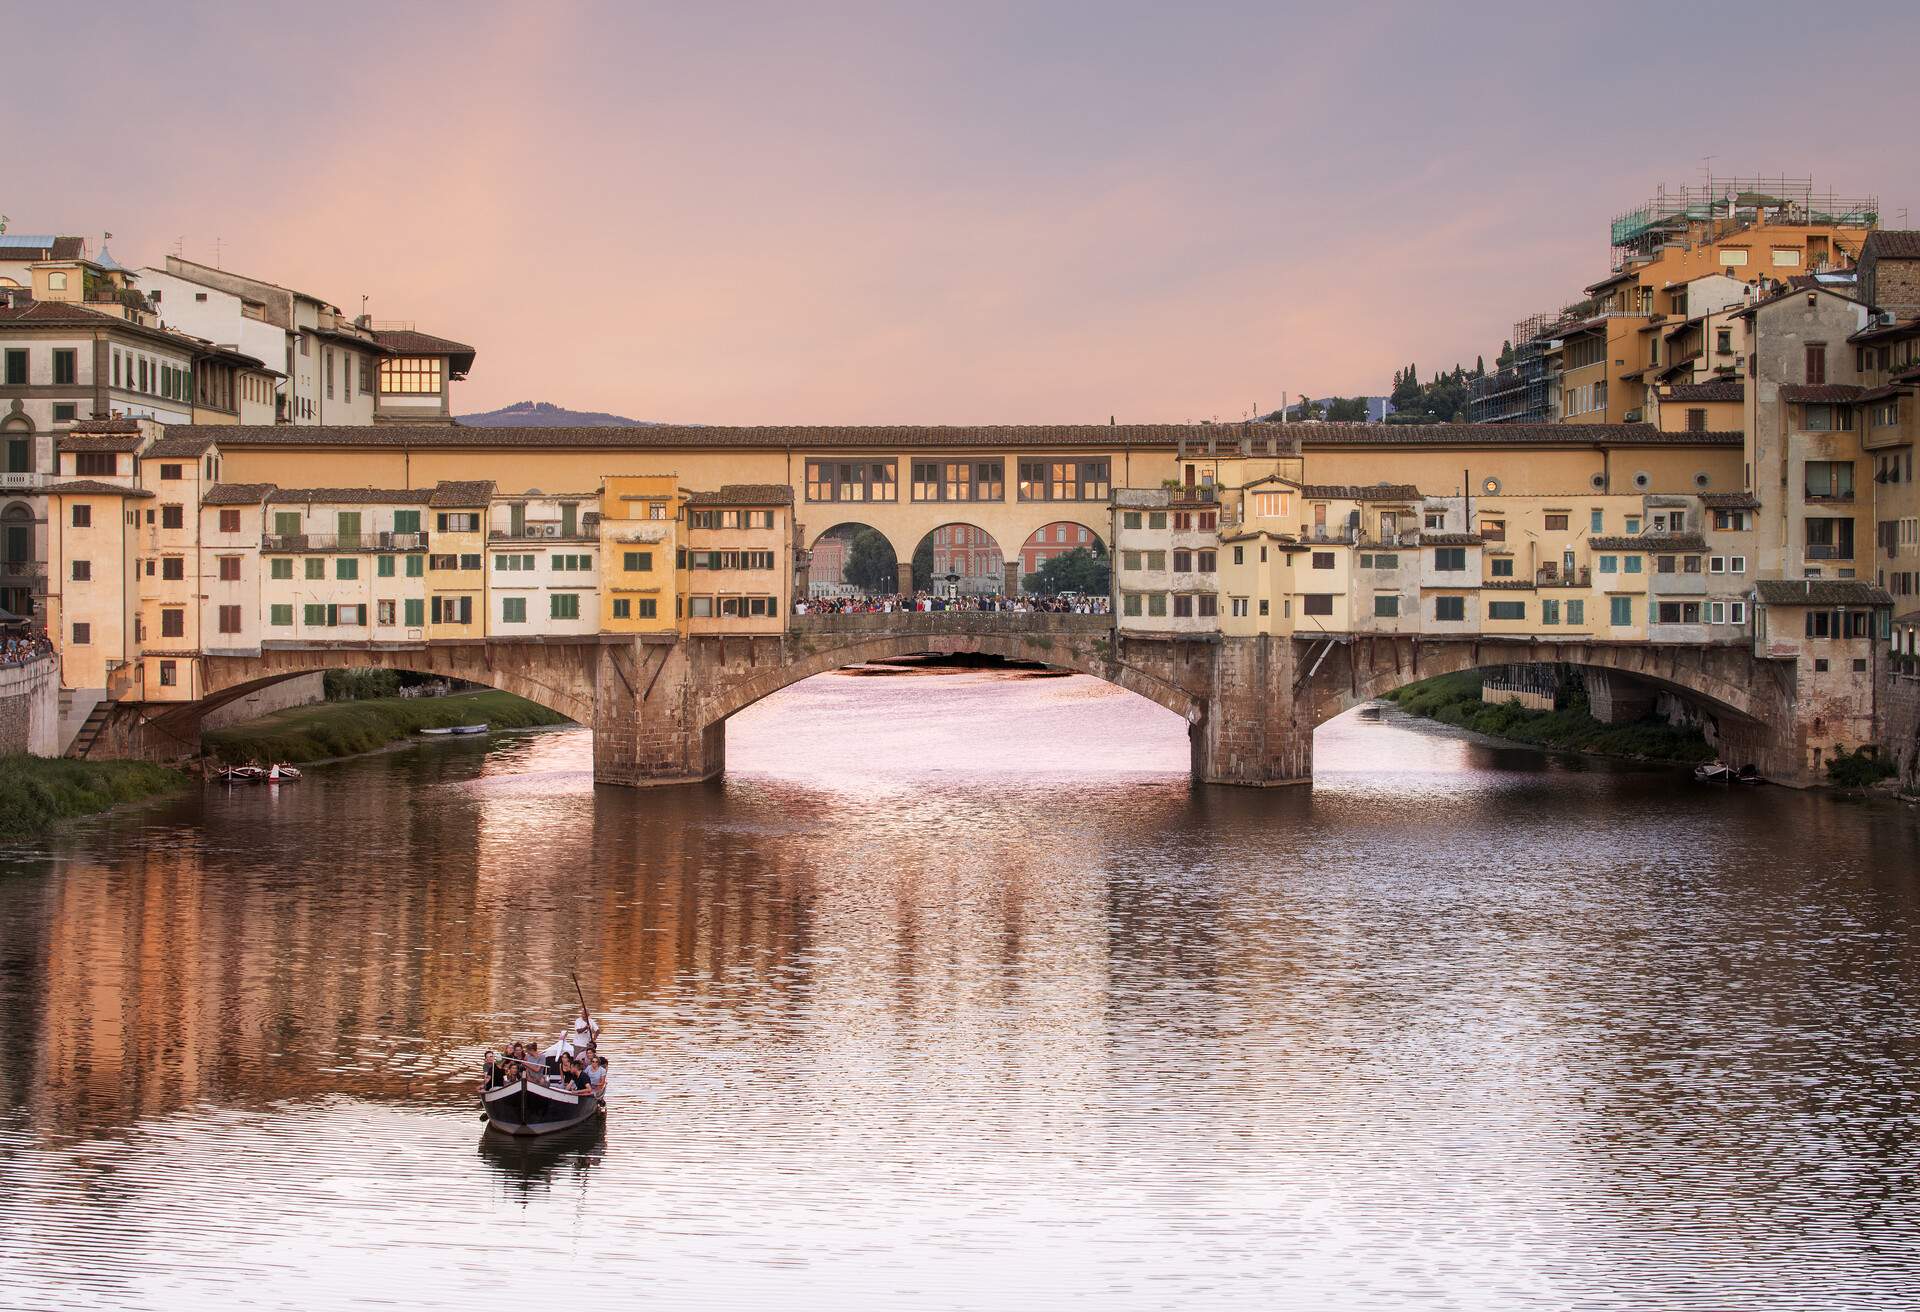 dest_italy_tuscany_florence_river-arno_gettyimages-615783860_universal_within-usage-period_66382.jpg